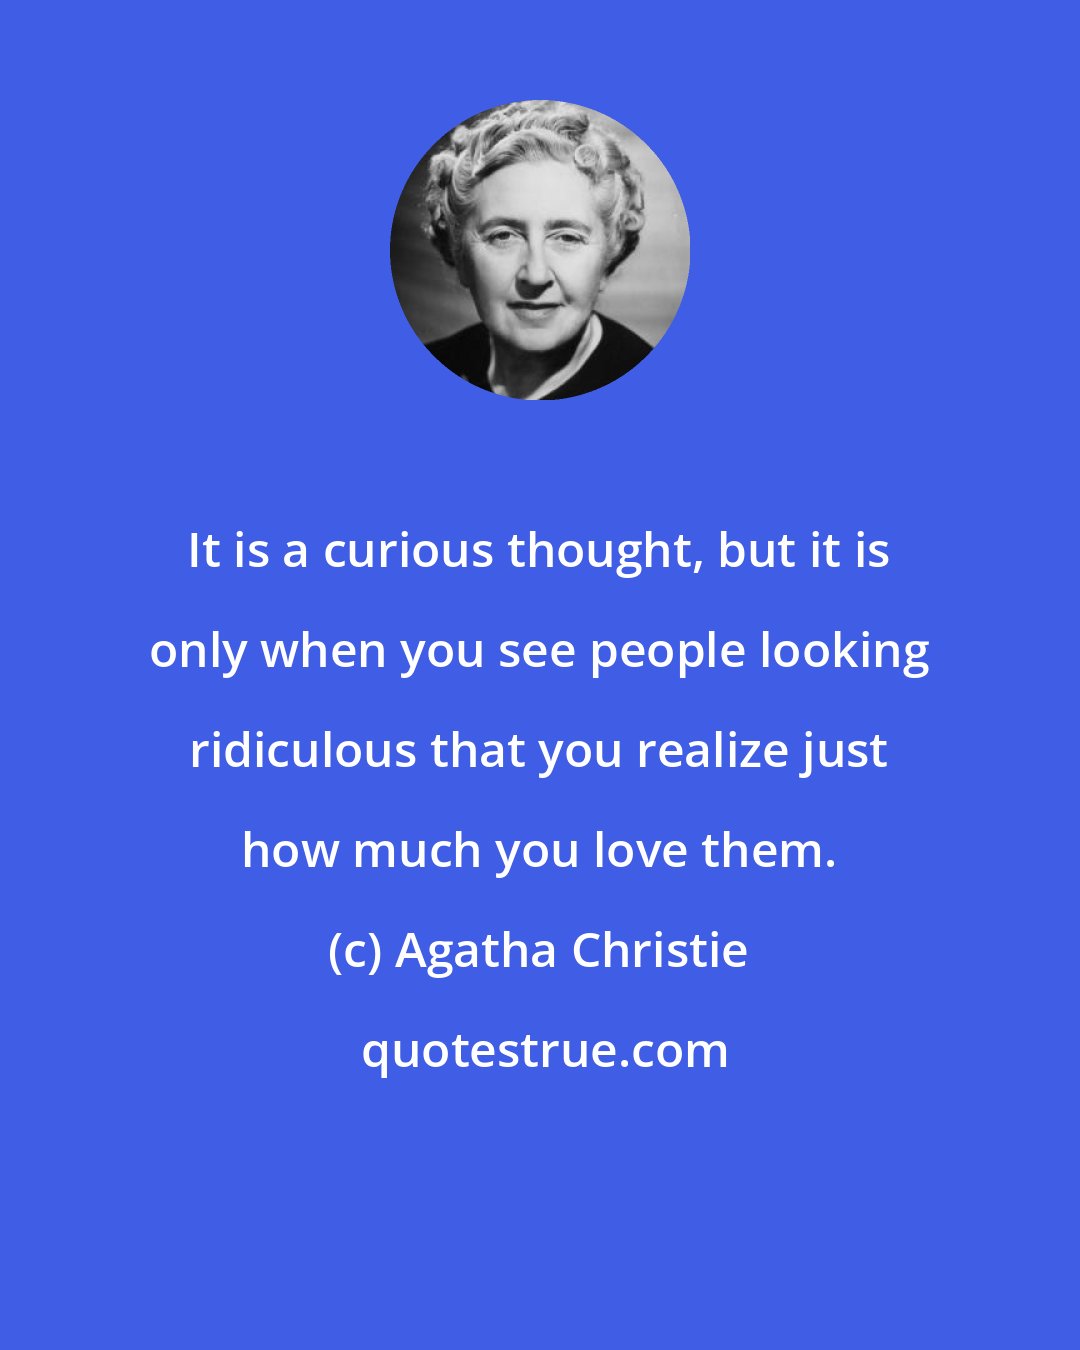 Agatha Christie: It is a curious thought, but it is only when you see people looking ridiculous that you realize just how much you love them.